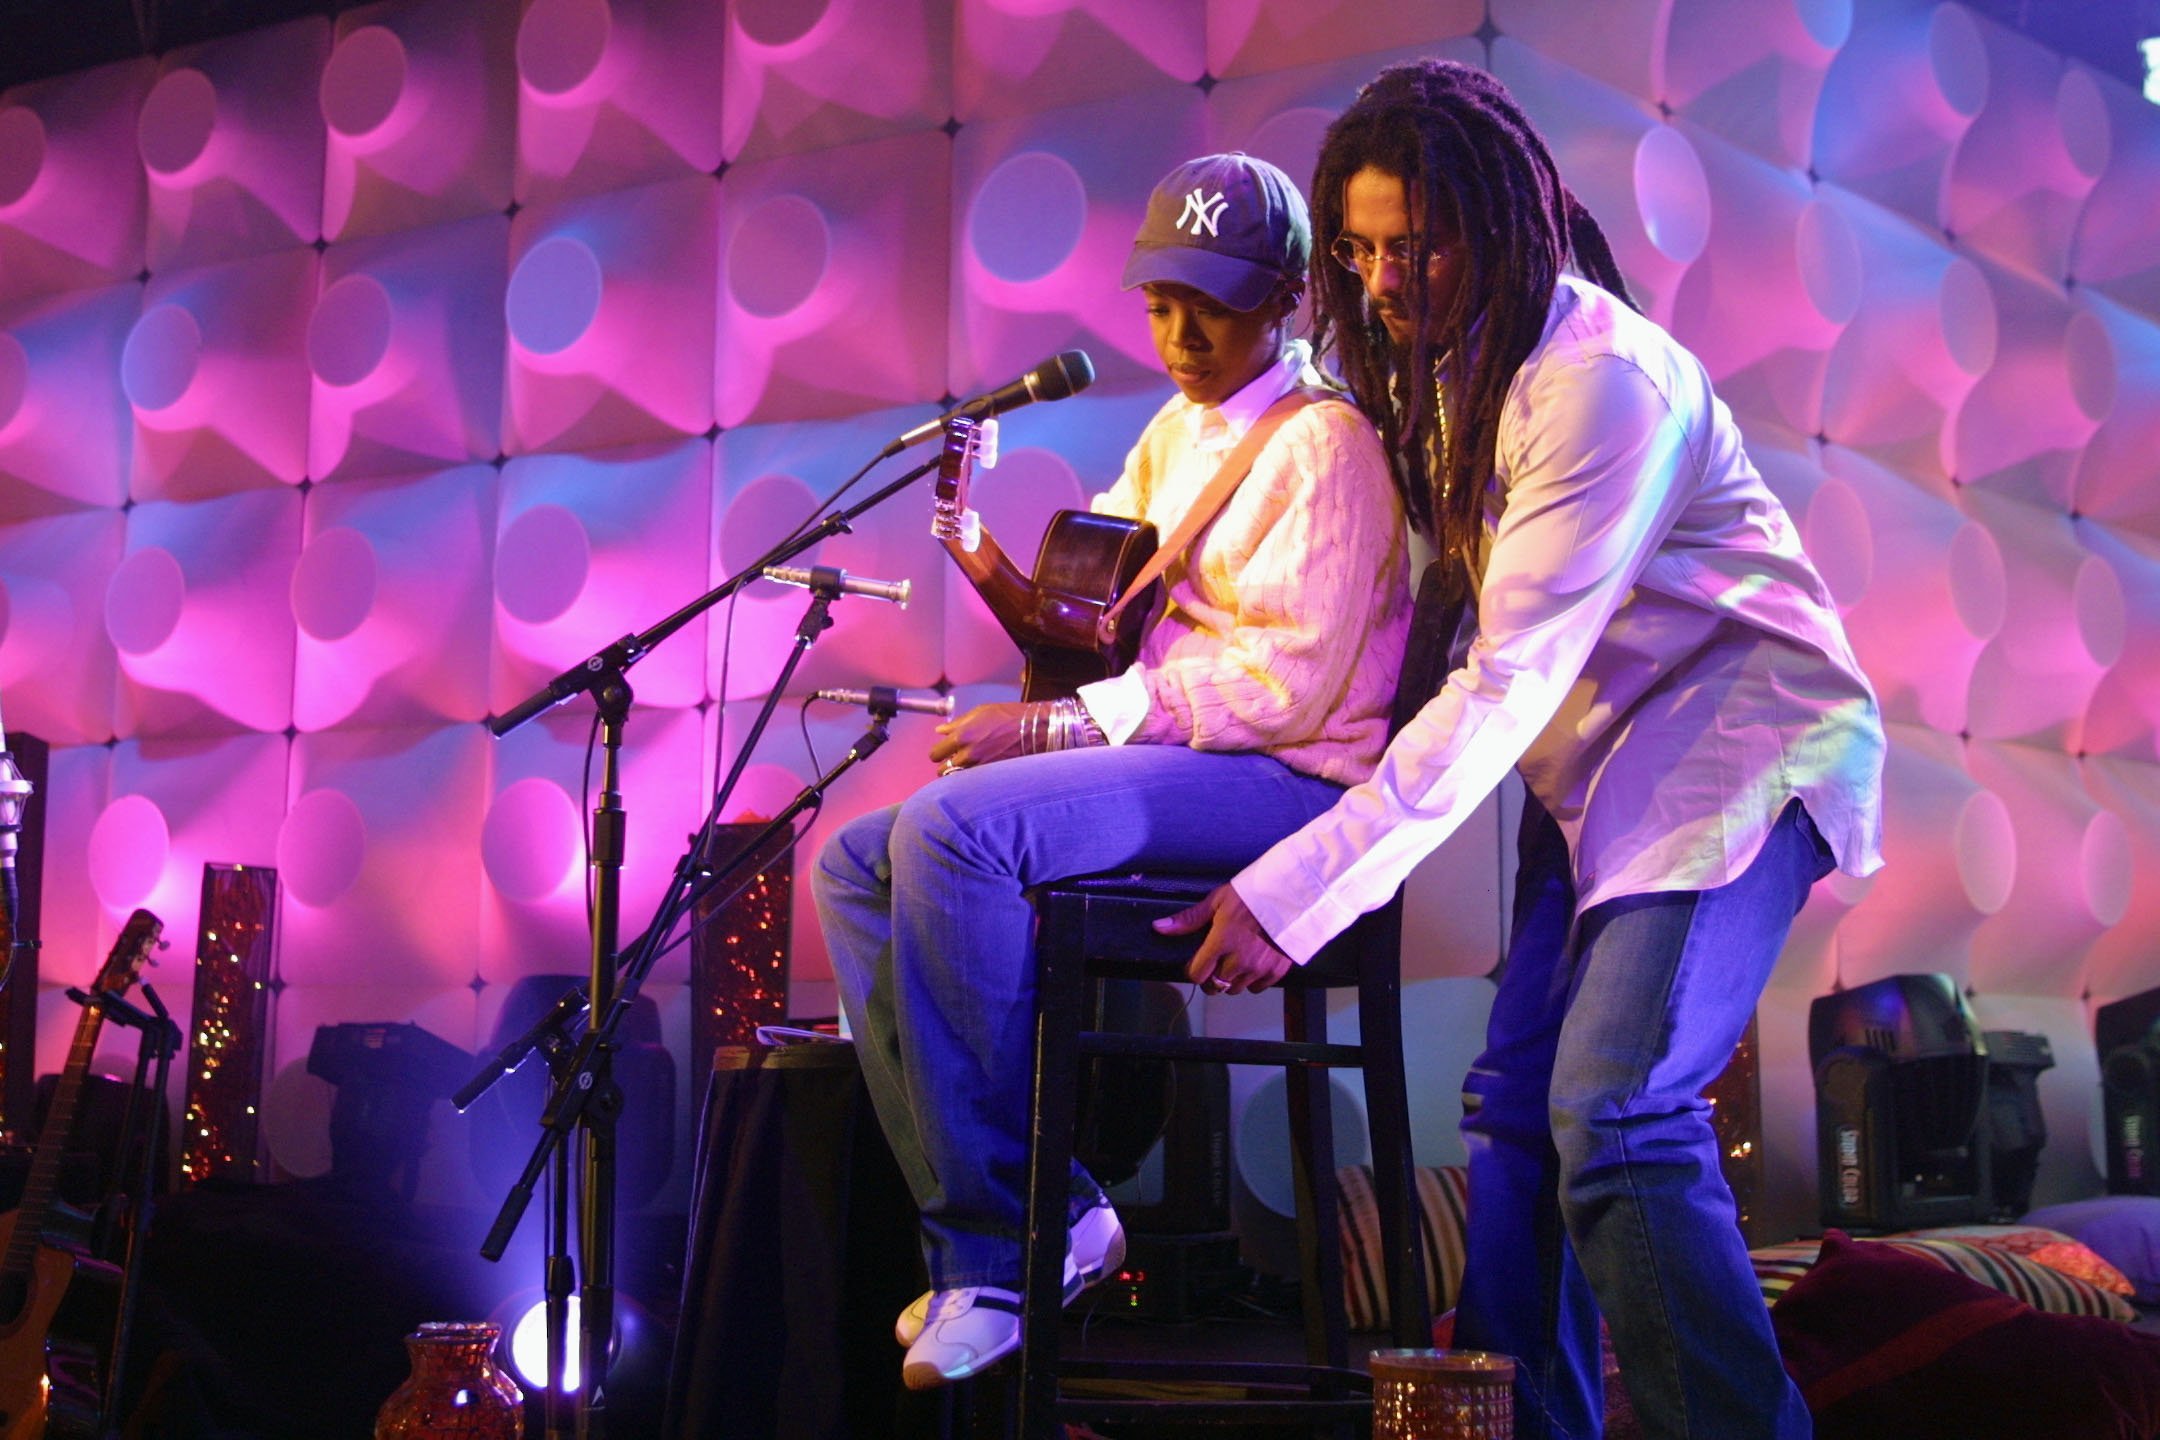 Rohan Marley helping out Lauryn Hill during rehearsals for 'MTV Unplugged' at the MTV Studios in New York City on Jul. 21, 2001. | Photo: Getty Images